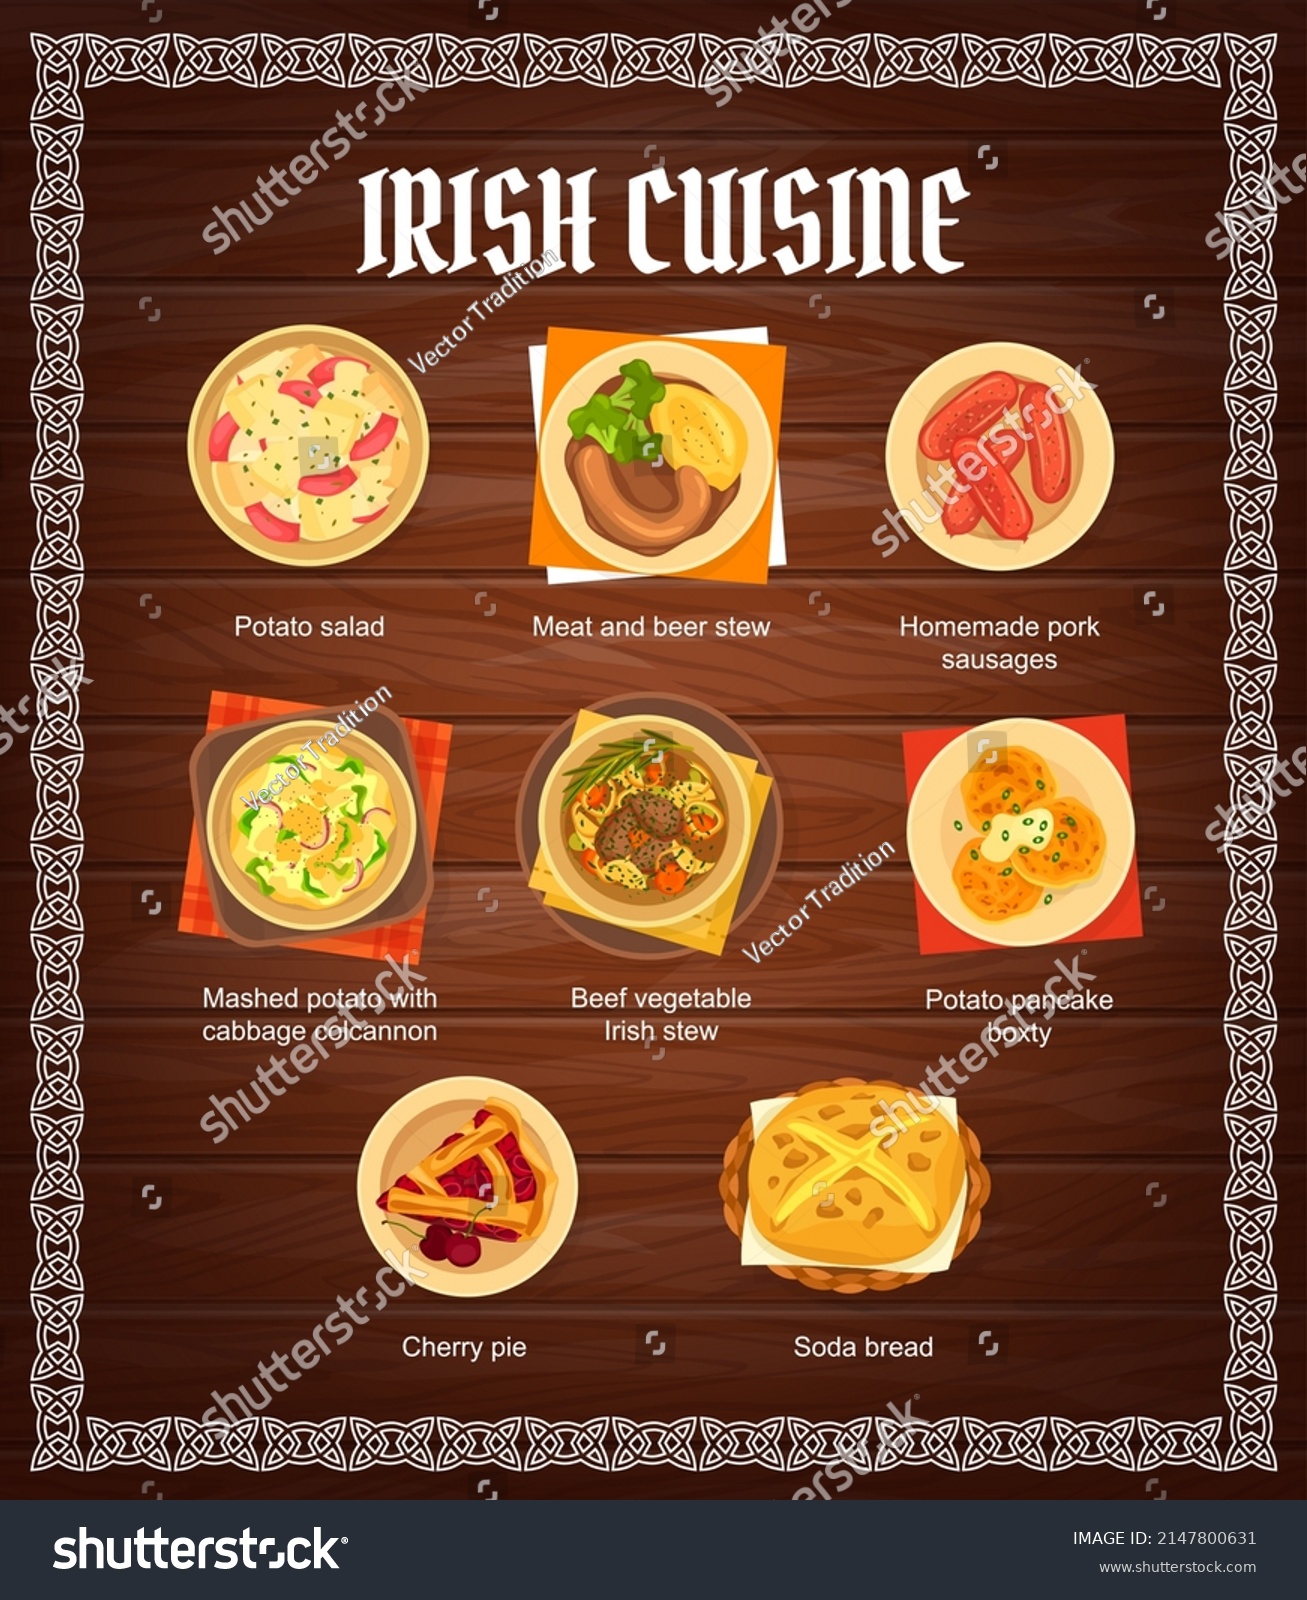 SVG of Irish cuisine restaurant dishes menu. Soda bread, beef vegetable Irish stew and cherry pie, potato salad, homemade pork sausages, and Boxty pancake, meat and beer stew vector. Irish food meals banner svg